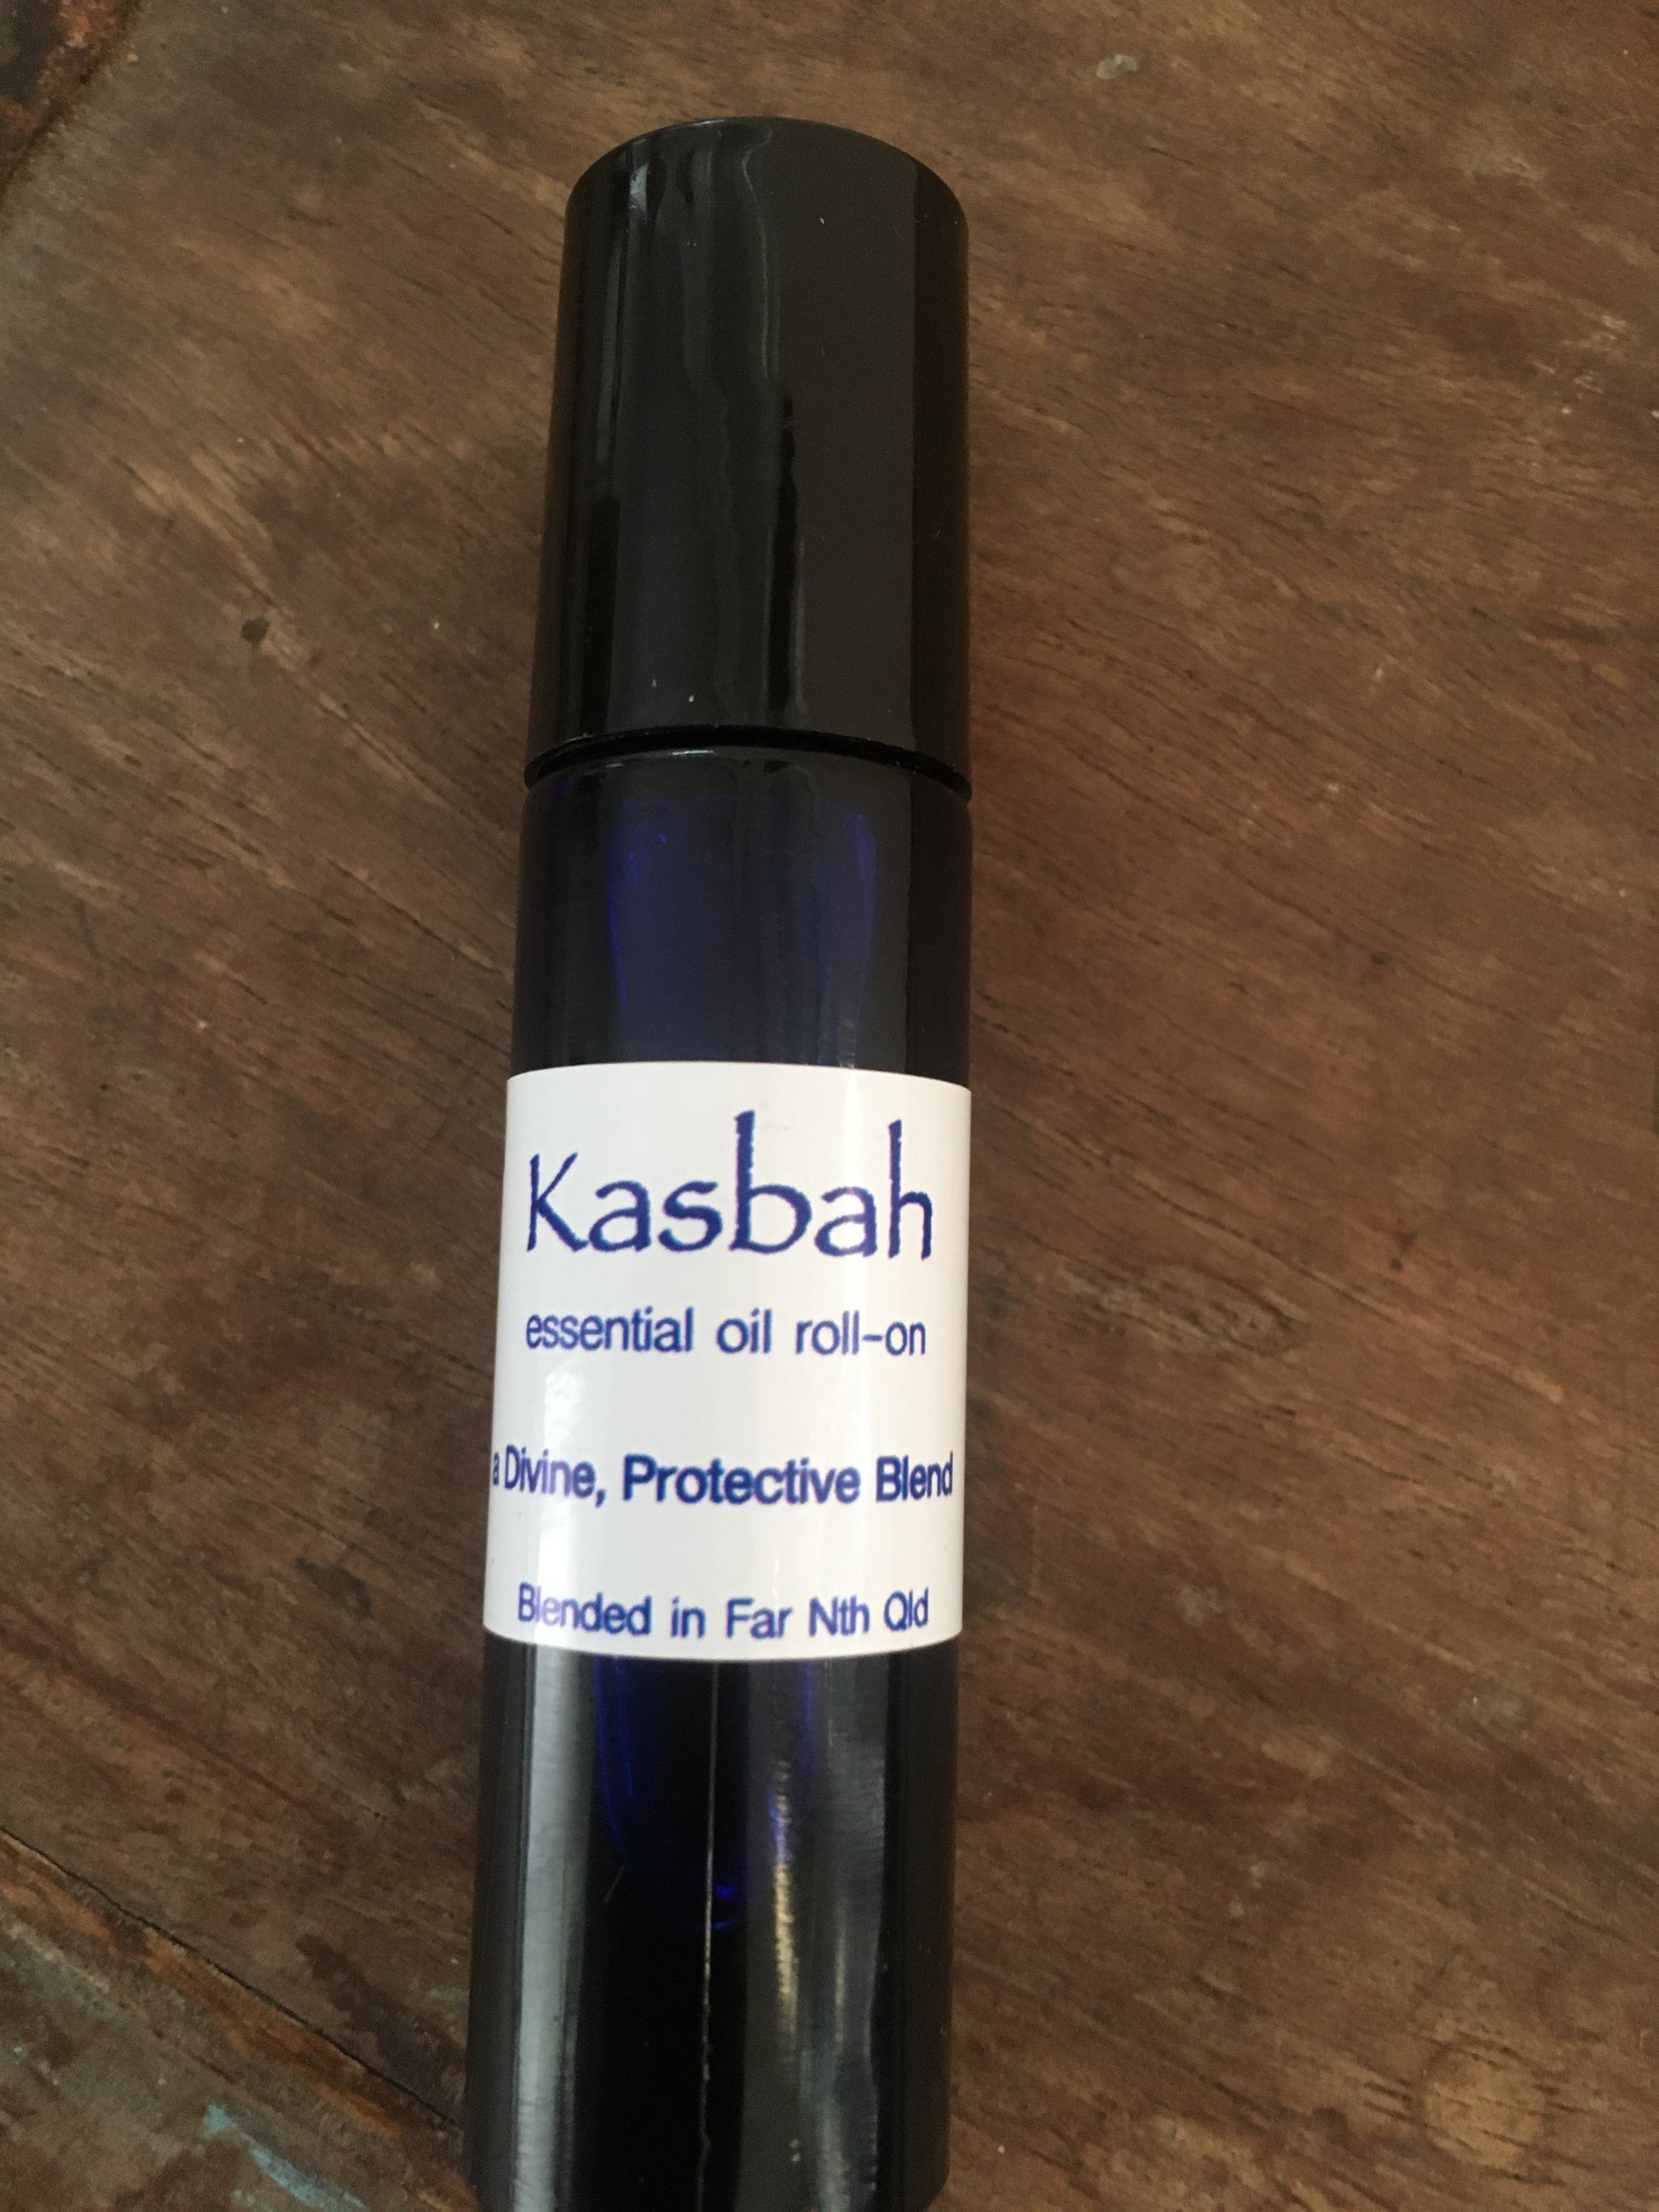 Kasbah Roll-on - The Amber Trail